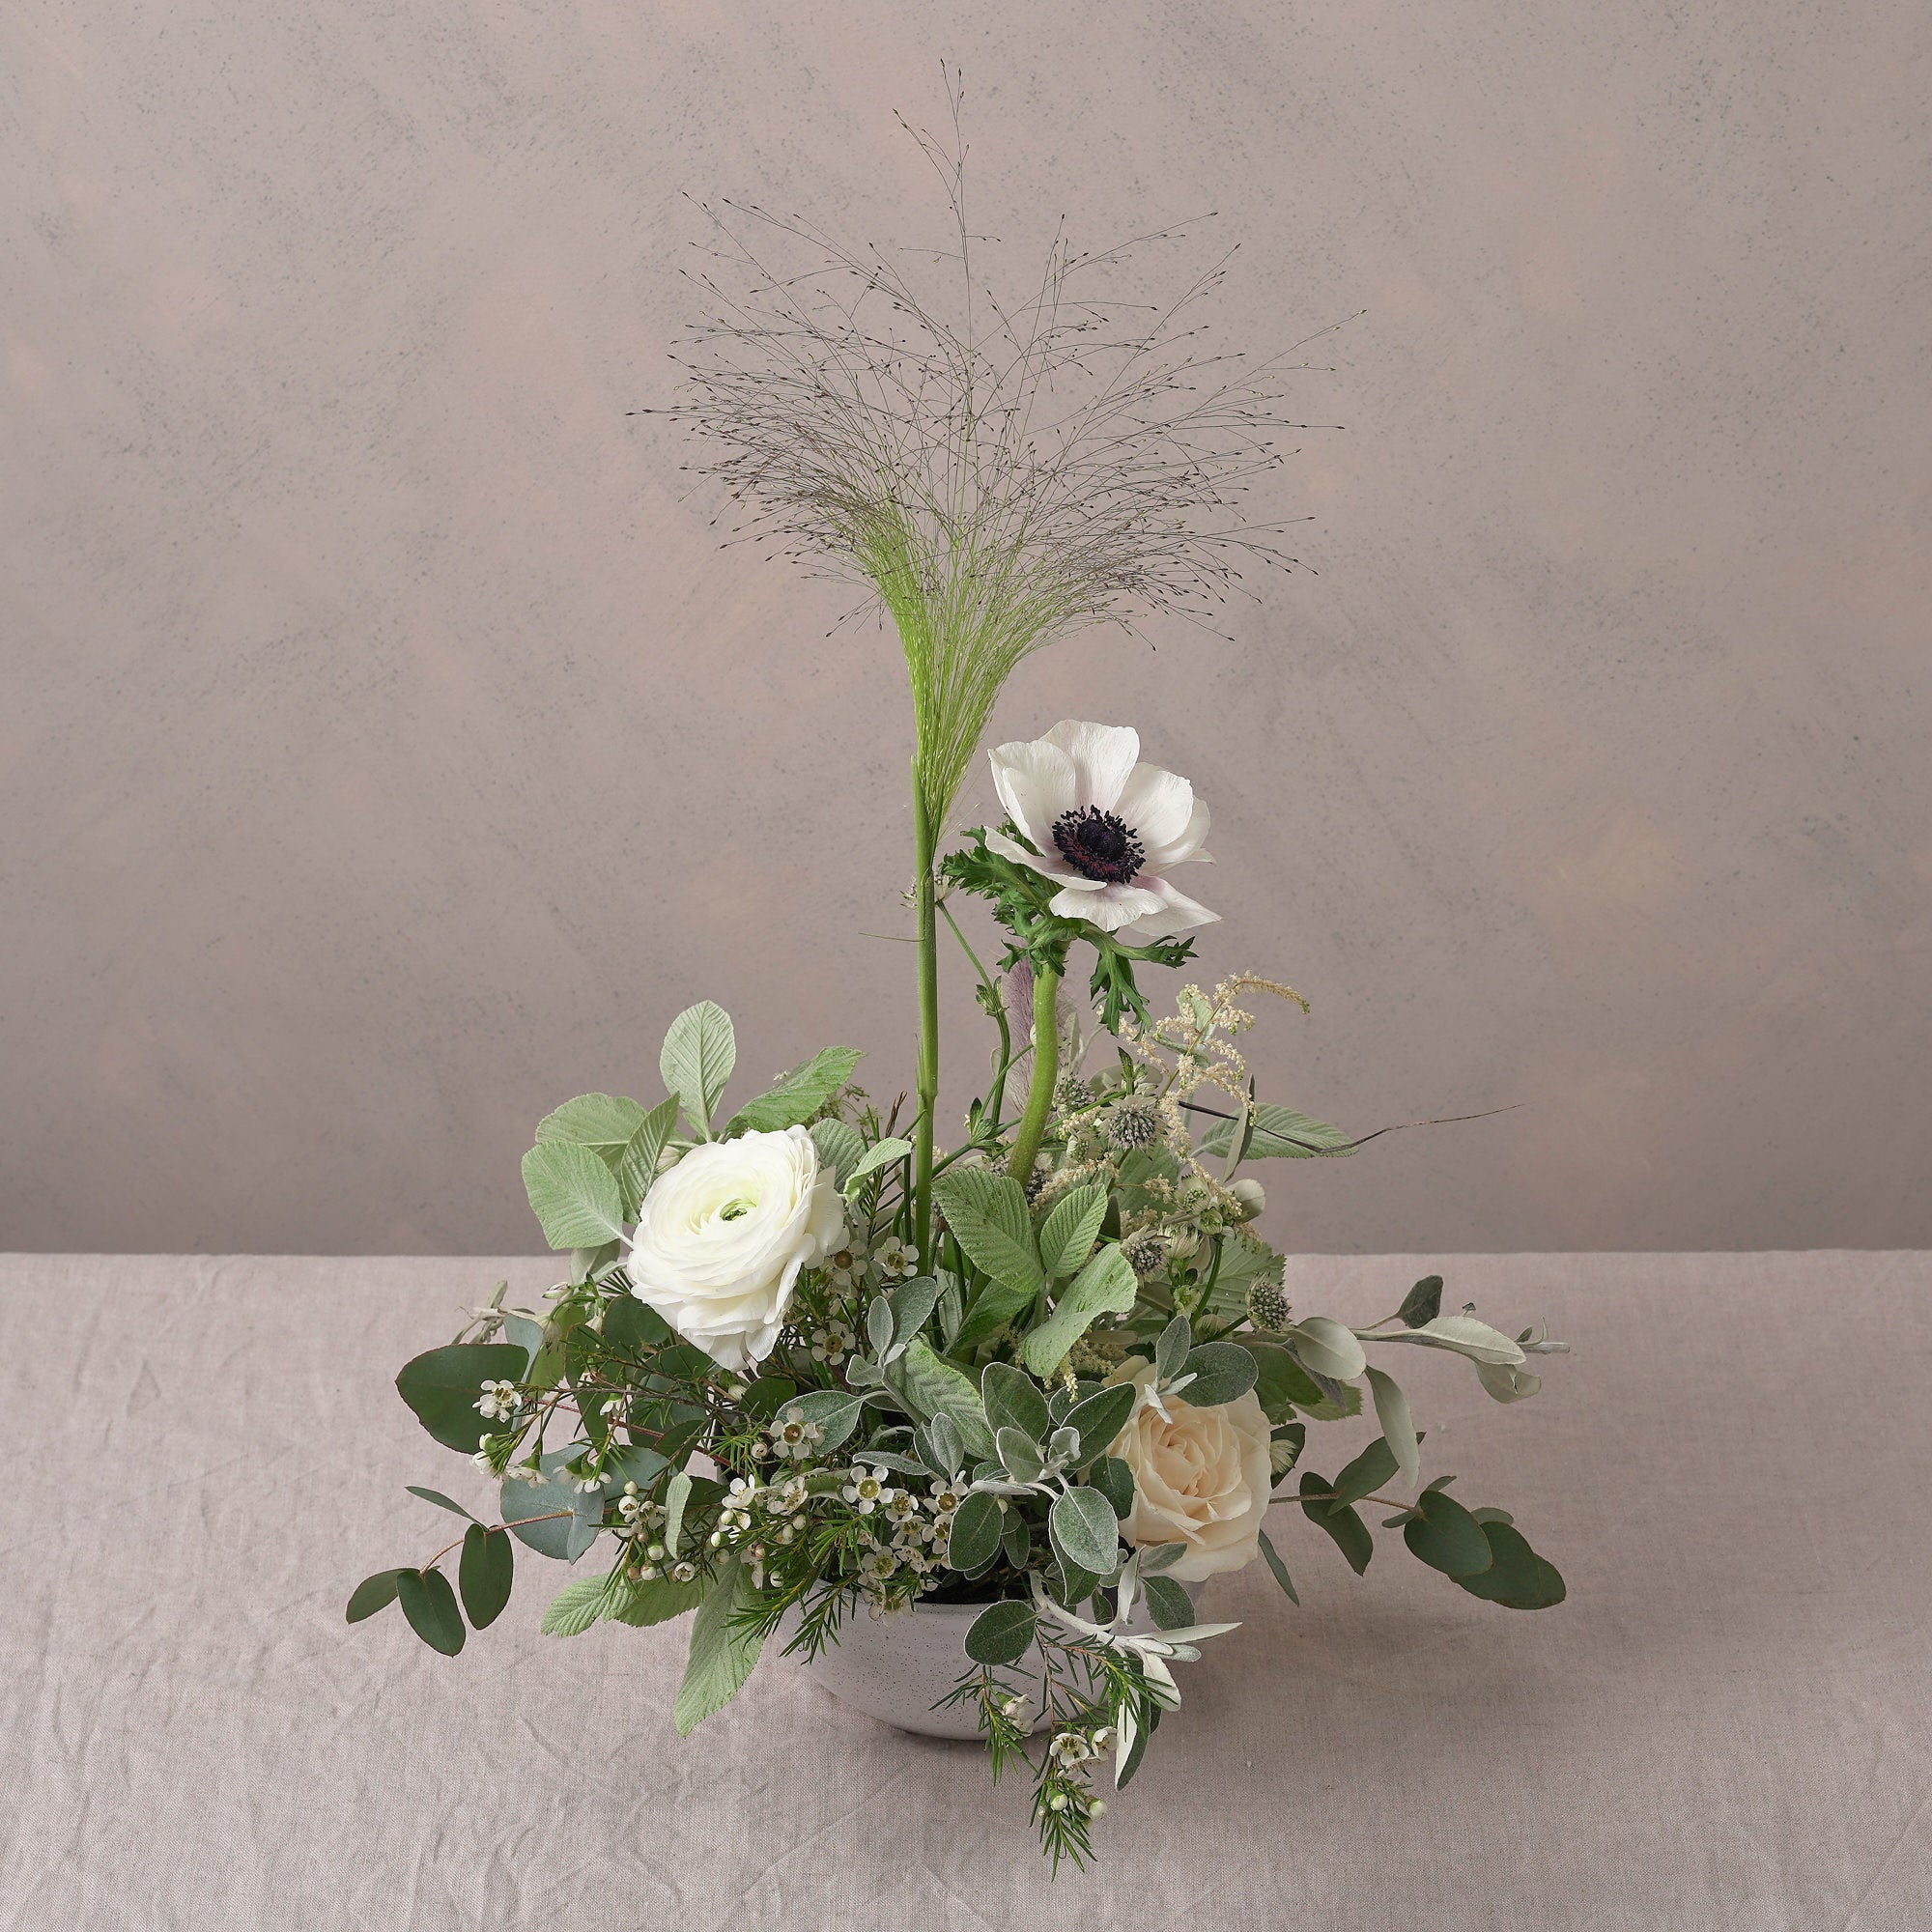 classic white and green bowl arrangements for weddings and events by Botanique Workshop London